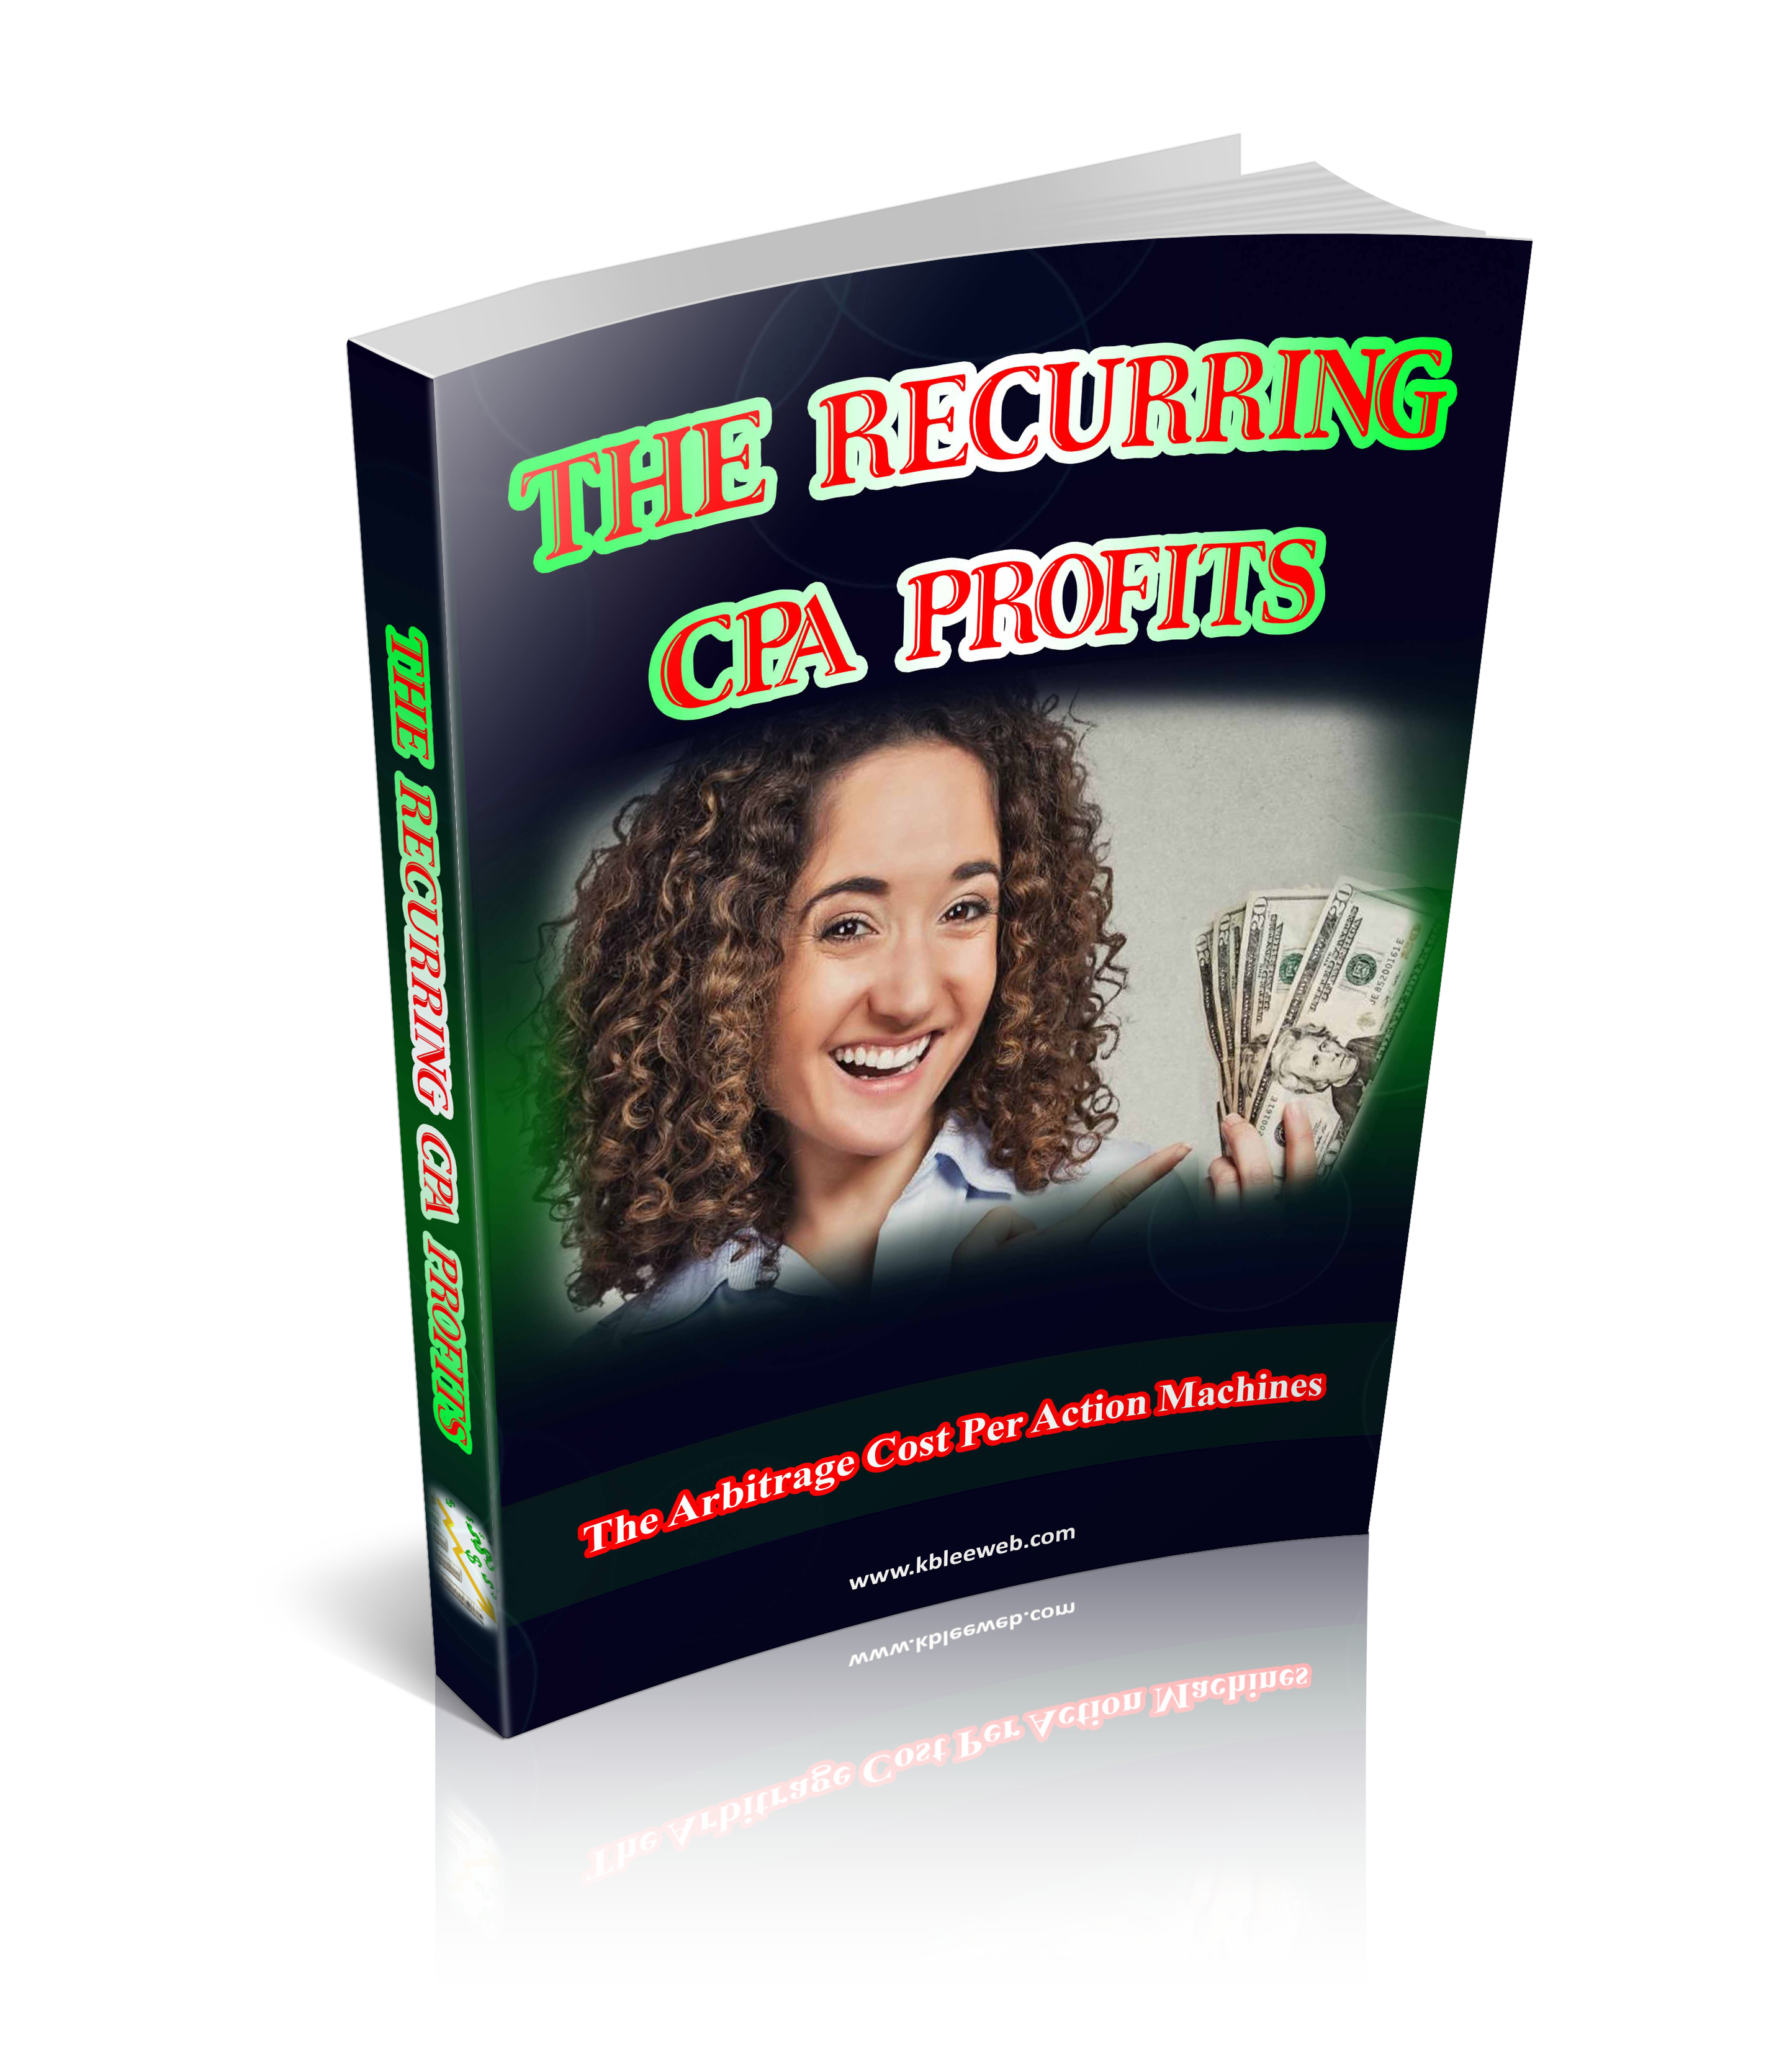 The Recurring CPA Profits - Global Trust Web Design and Marketing Consult